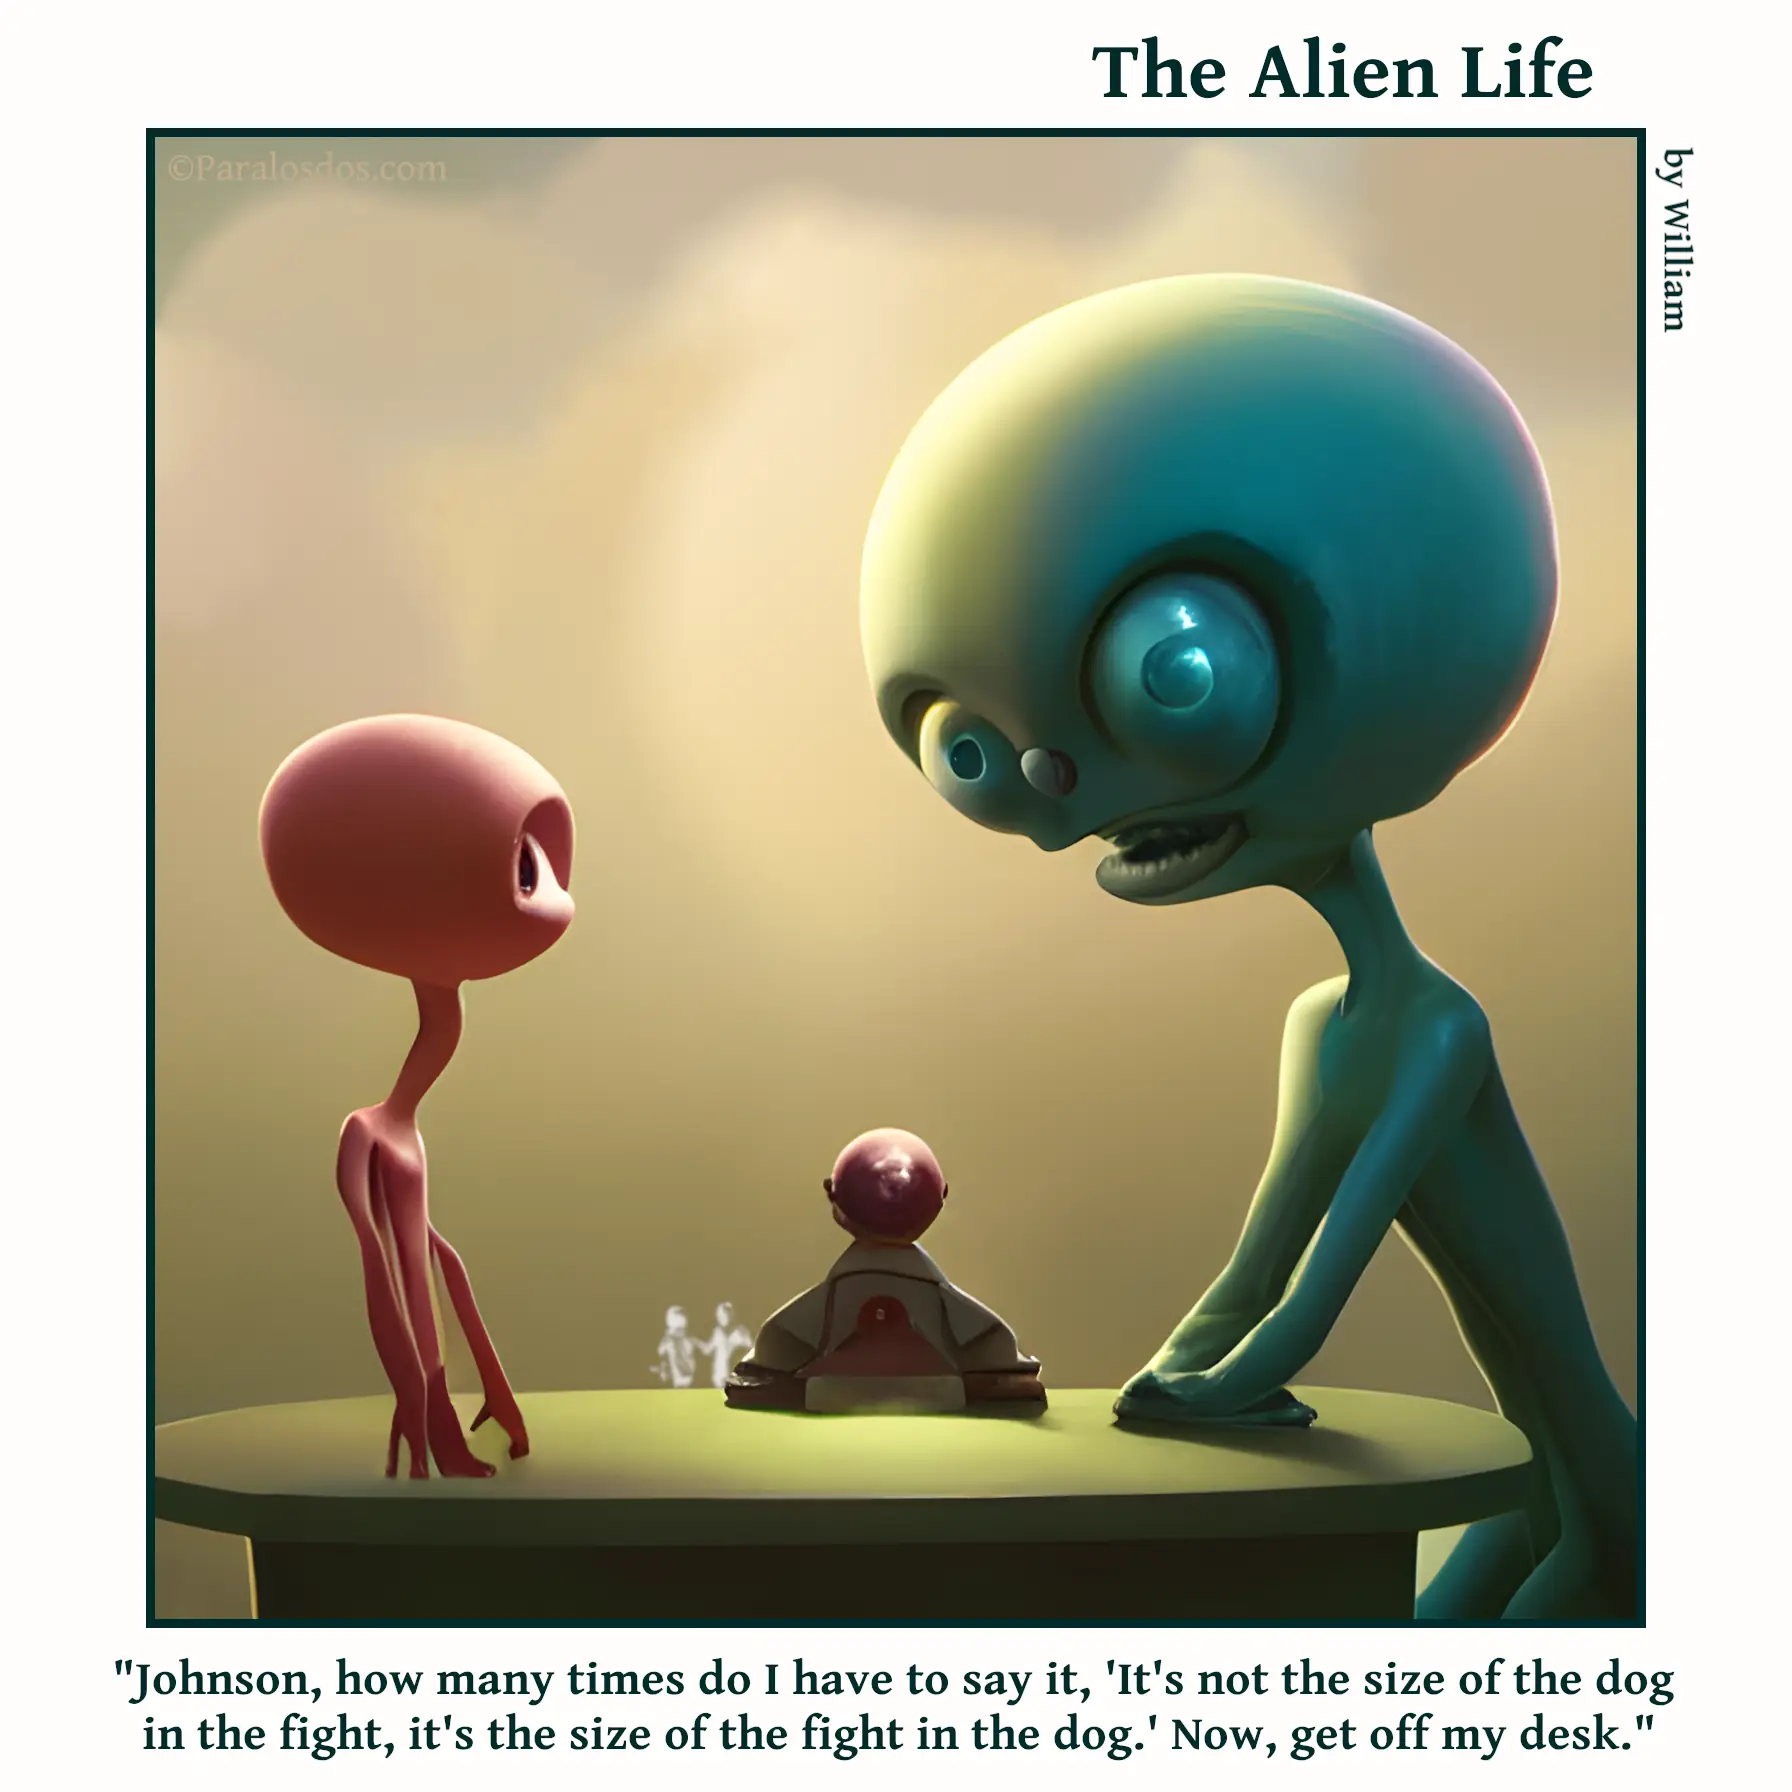 The Alien Life, one panel Comic. A big alien is talking to a little alien who is standing on his desk. The caption reads: "Johnson, how many times do I have to say it, 'It's not the size of the dog in the fight, it's the size of the fight in the dog.' Now, get off my desk."